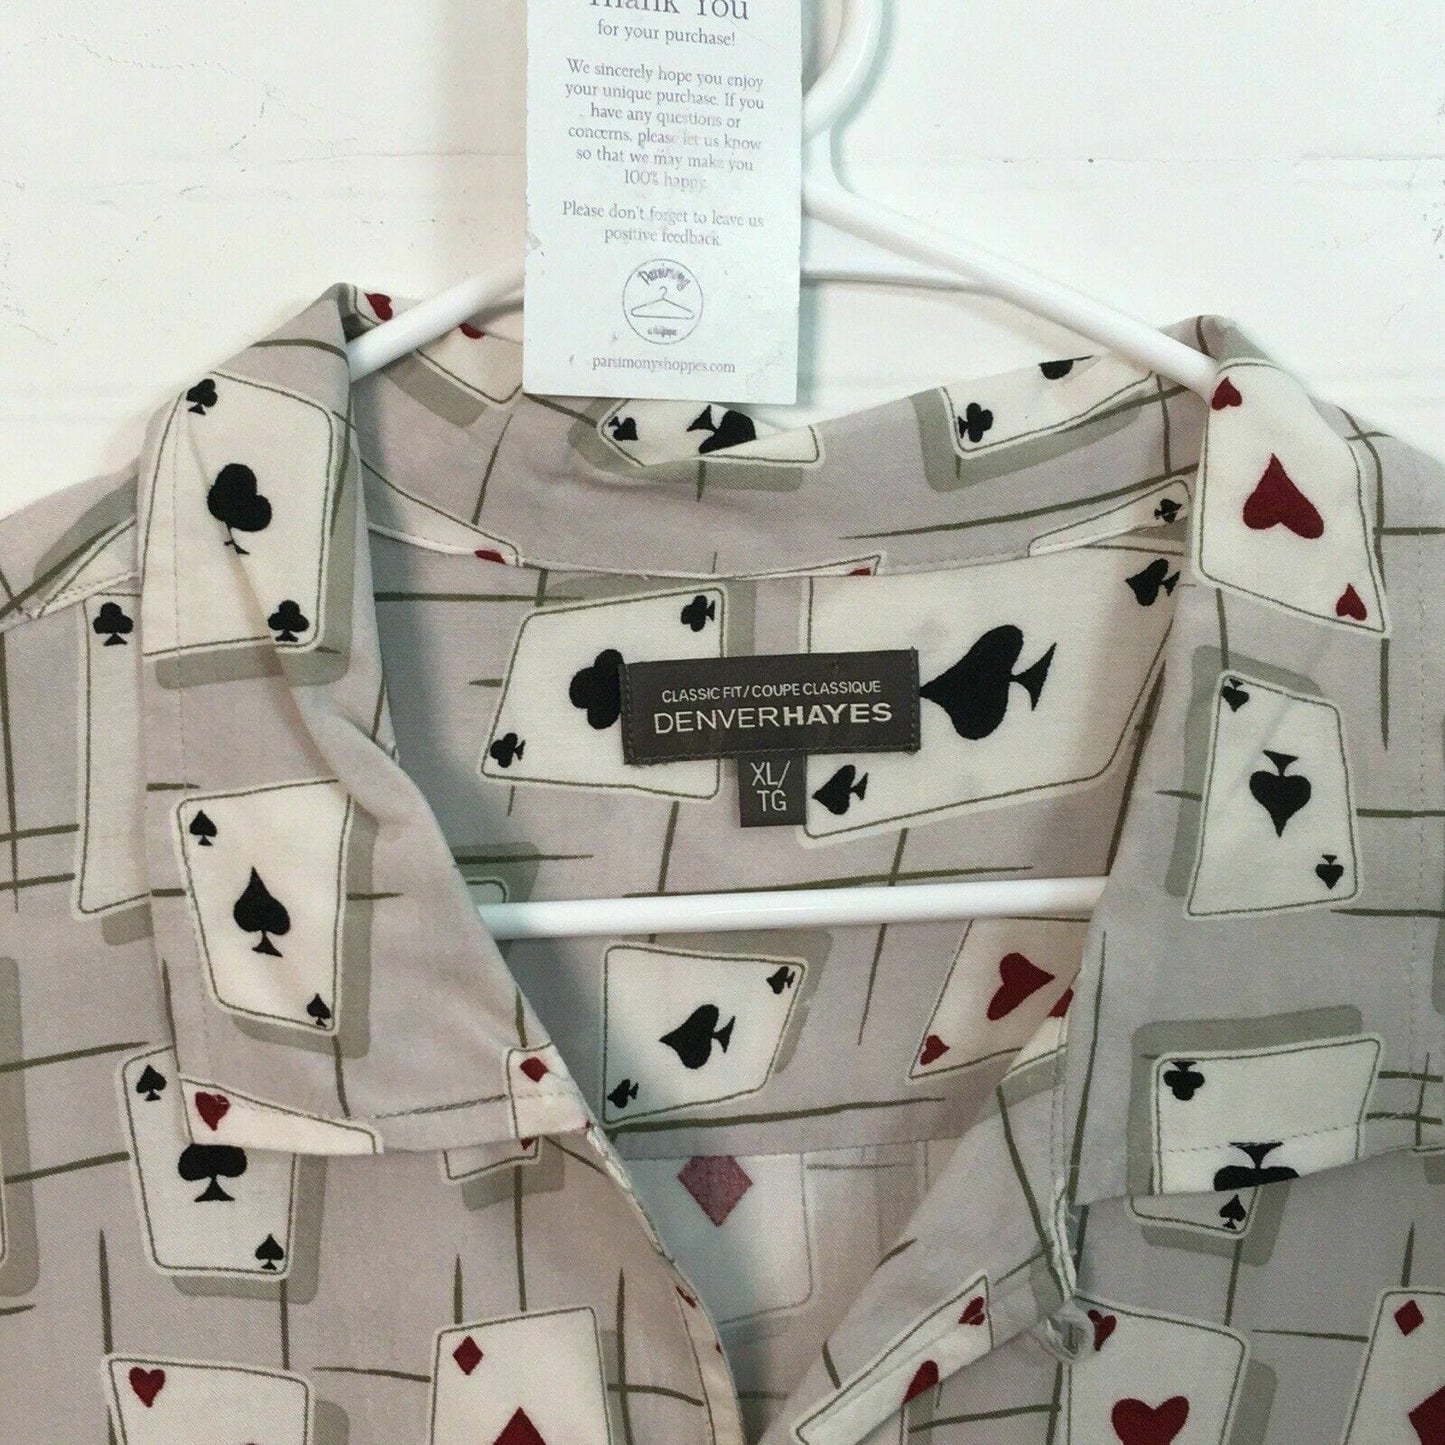 Sophisticated Denver Hayes Men's Lounge Club Shirt - Beige - XL - Playing Cards - Short Sleeve - Used